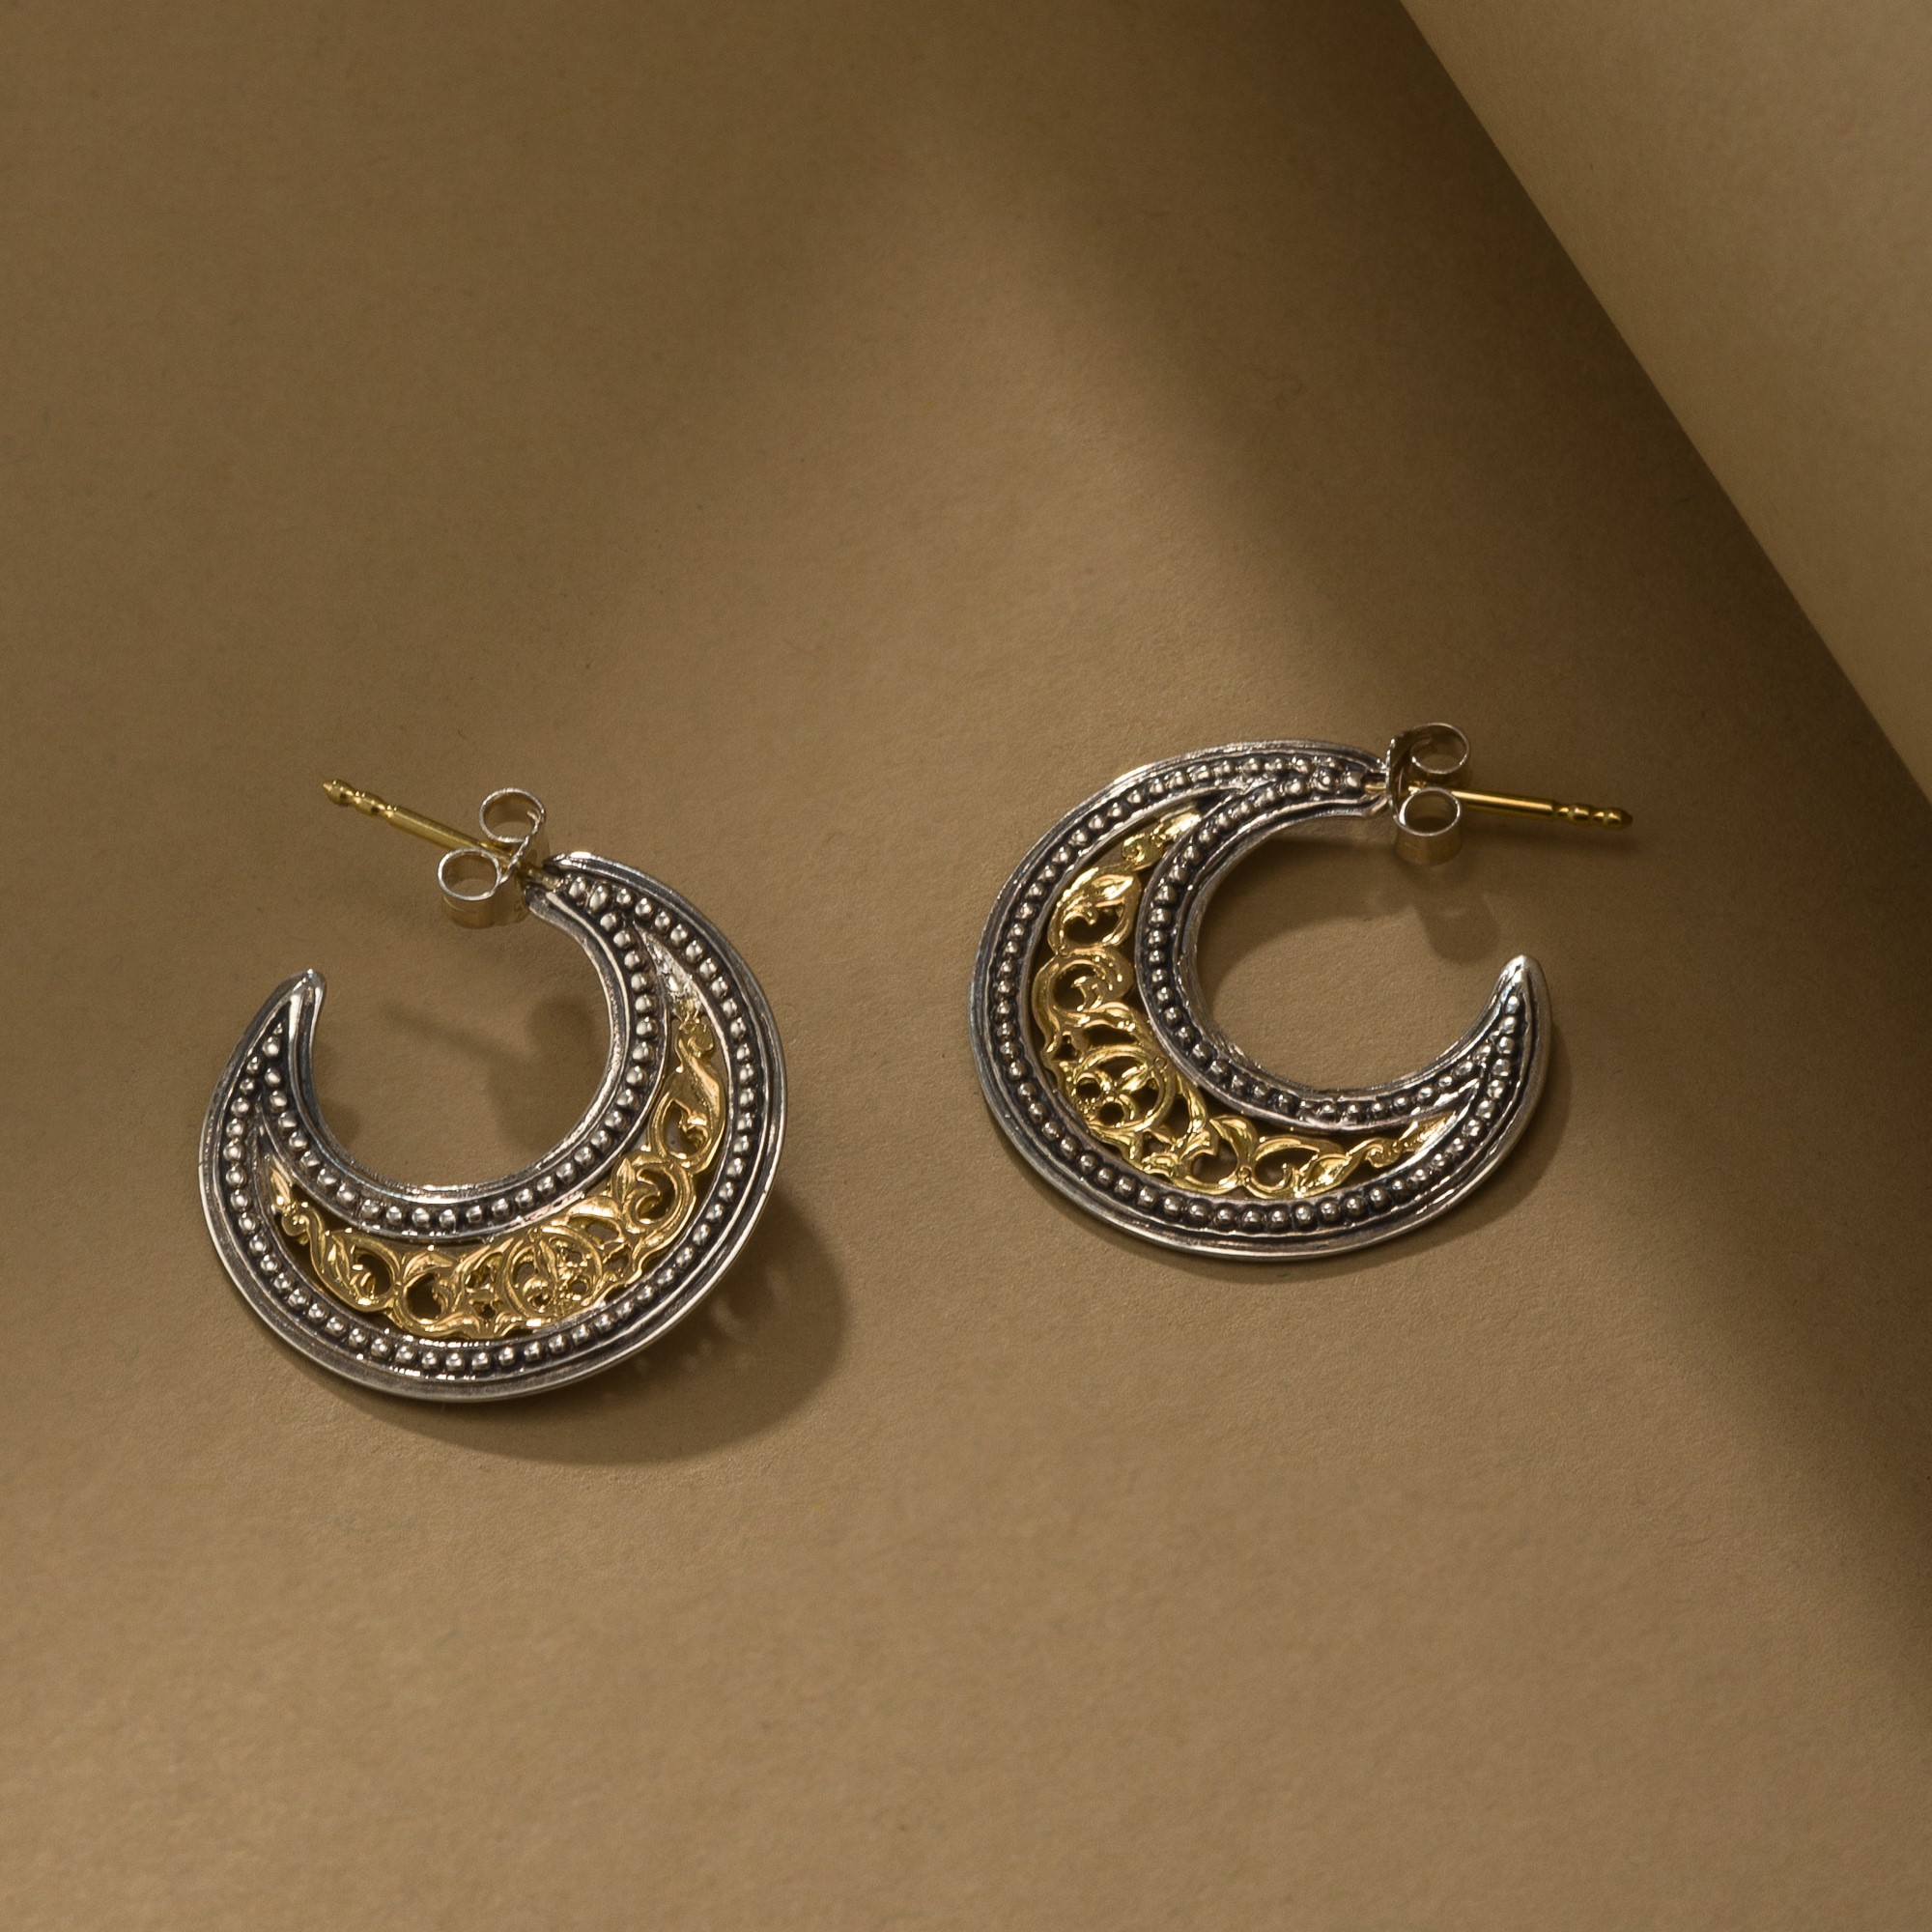 Garden Shadows small Hoops Earrings in 18K Gold and Sterling Silver